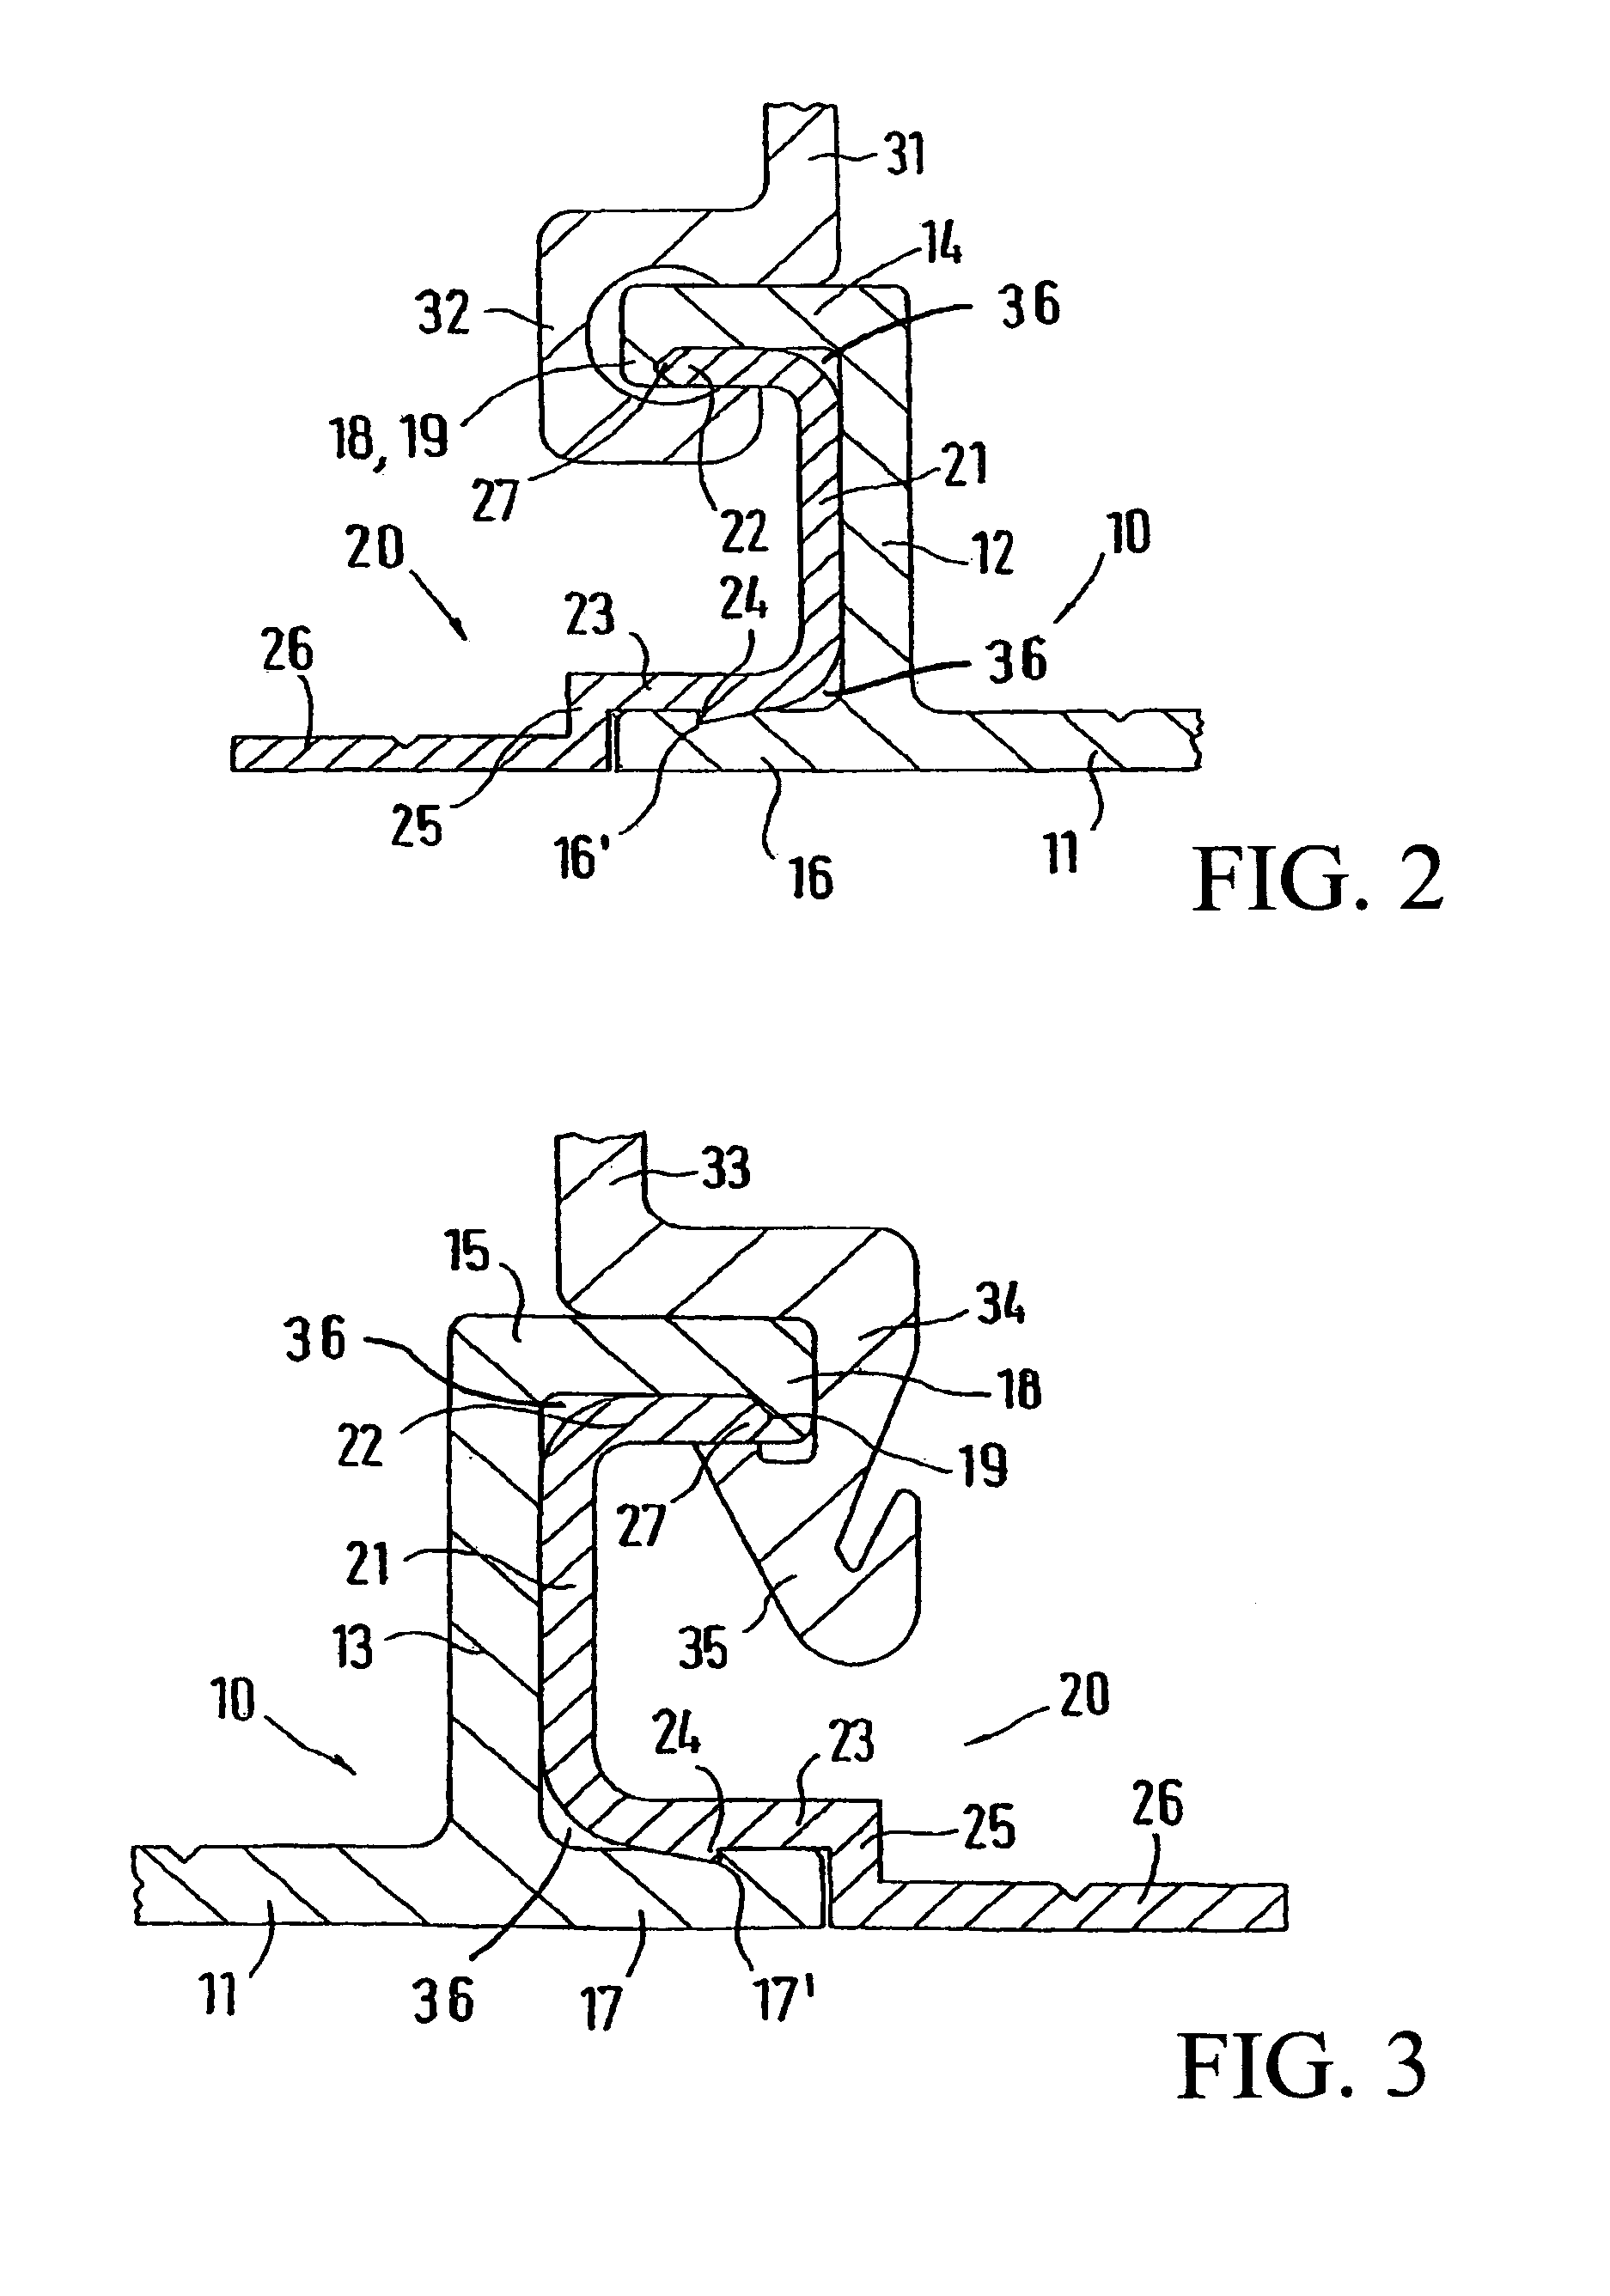 Bus bar system with assembly unit consisting of a base plate and fixing items